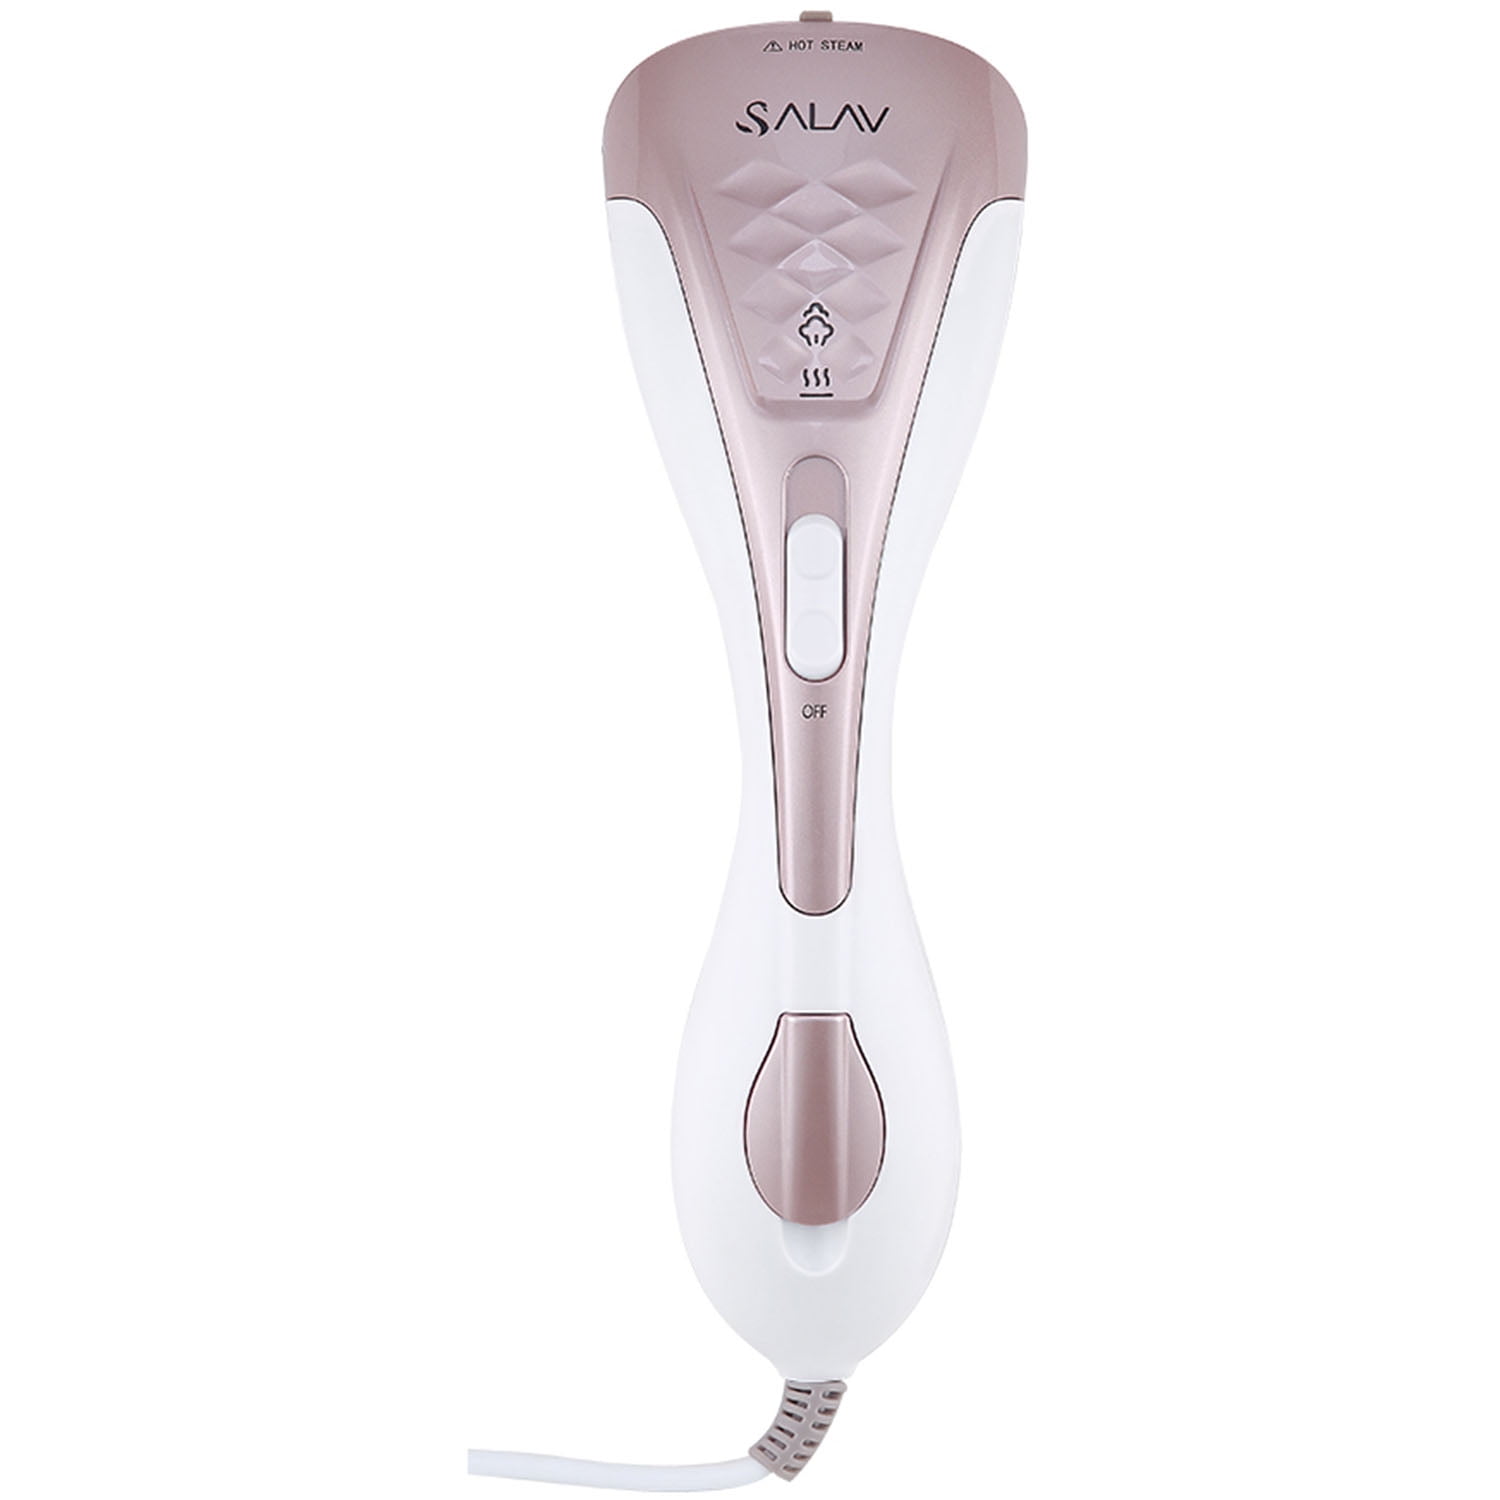 Hs-100 Rose Gold Duopress Hand Held Steamer Plus Iron, Rose Gold